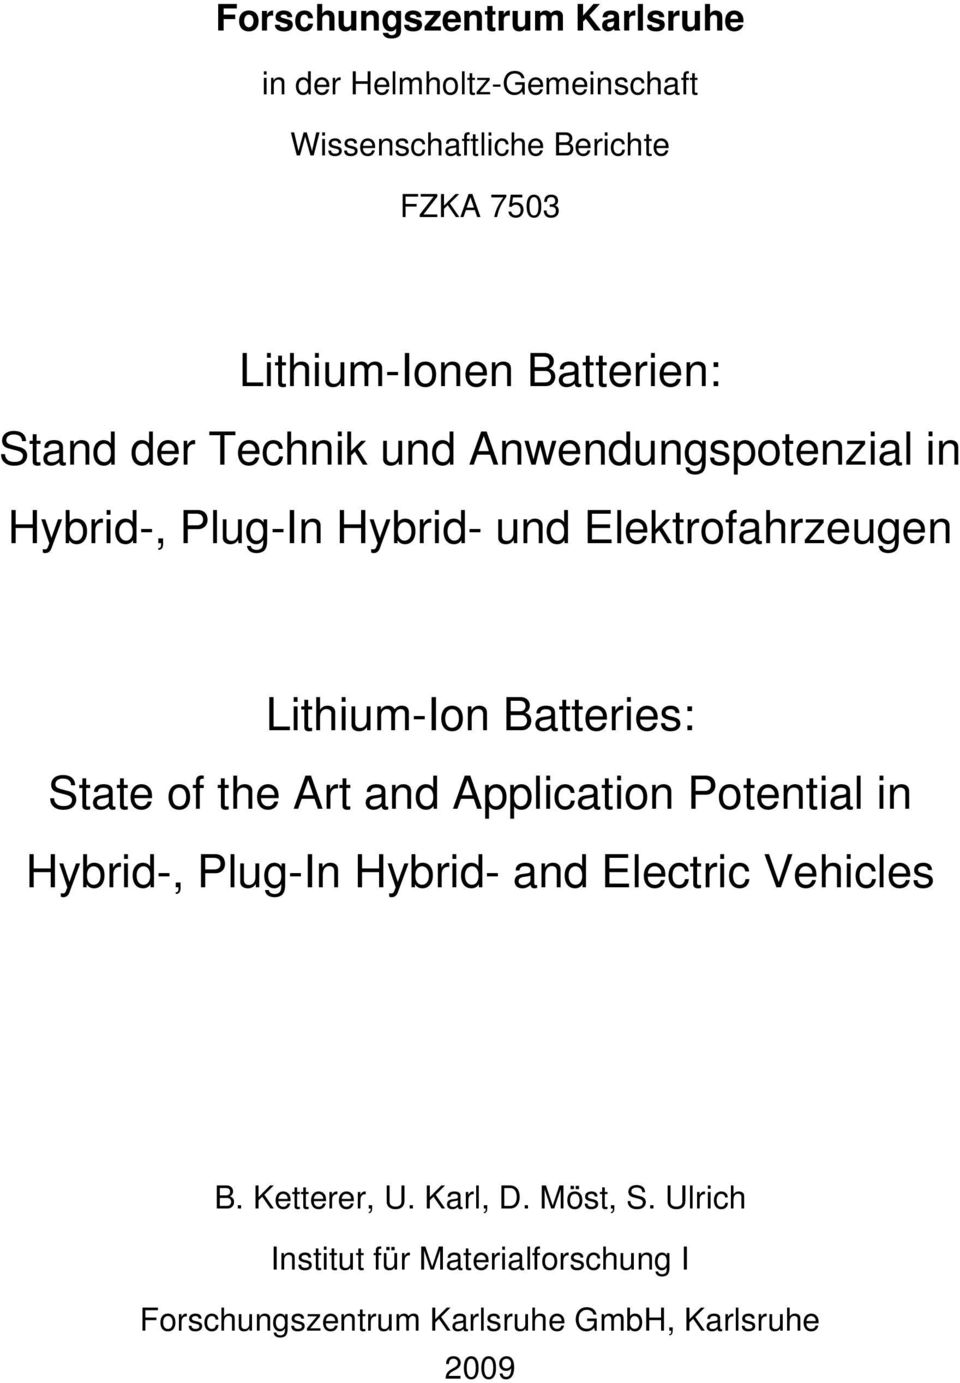 Lithium-Ion Batteries: State of the Art and Application Potential in Hybrid-, Plug-In Hybrid- and Electric